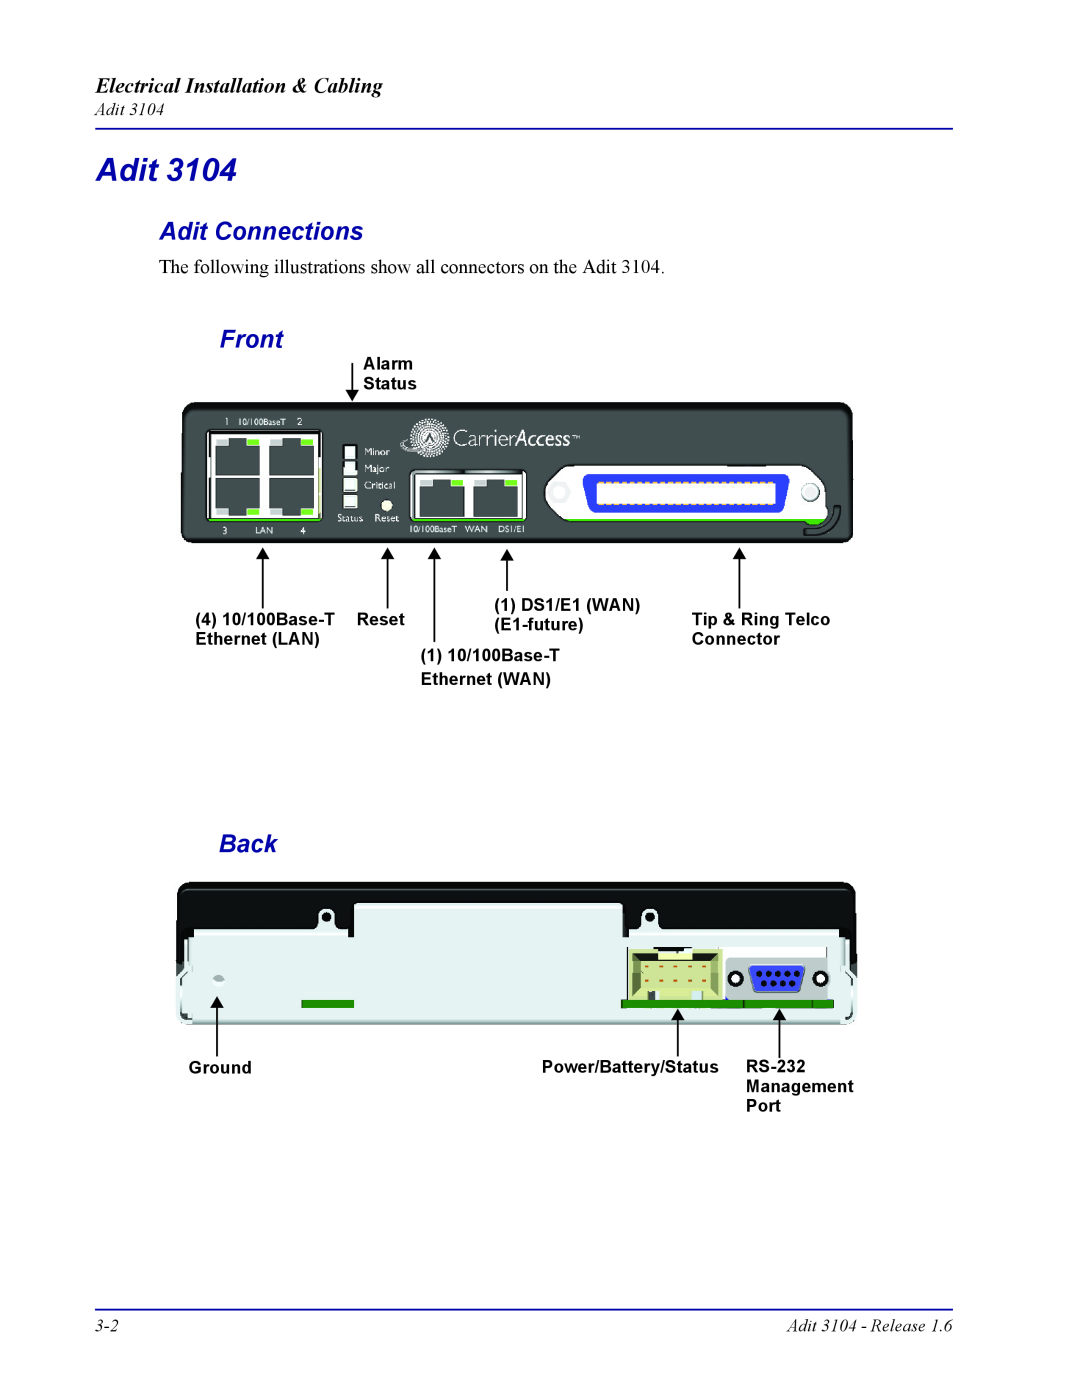 Carrier Access Adit 3104 user manual Adit Connections, Electrical Installation & Cabling, Front, Back 